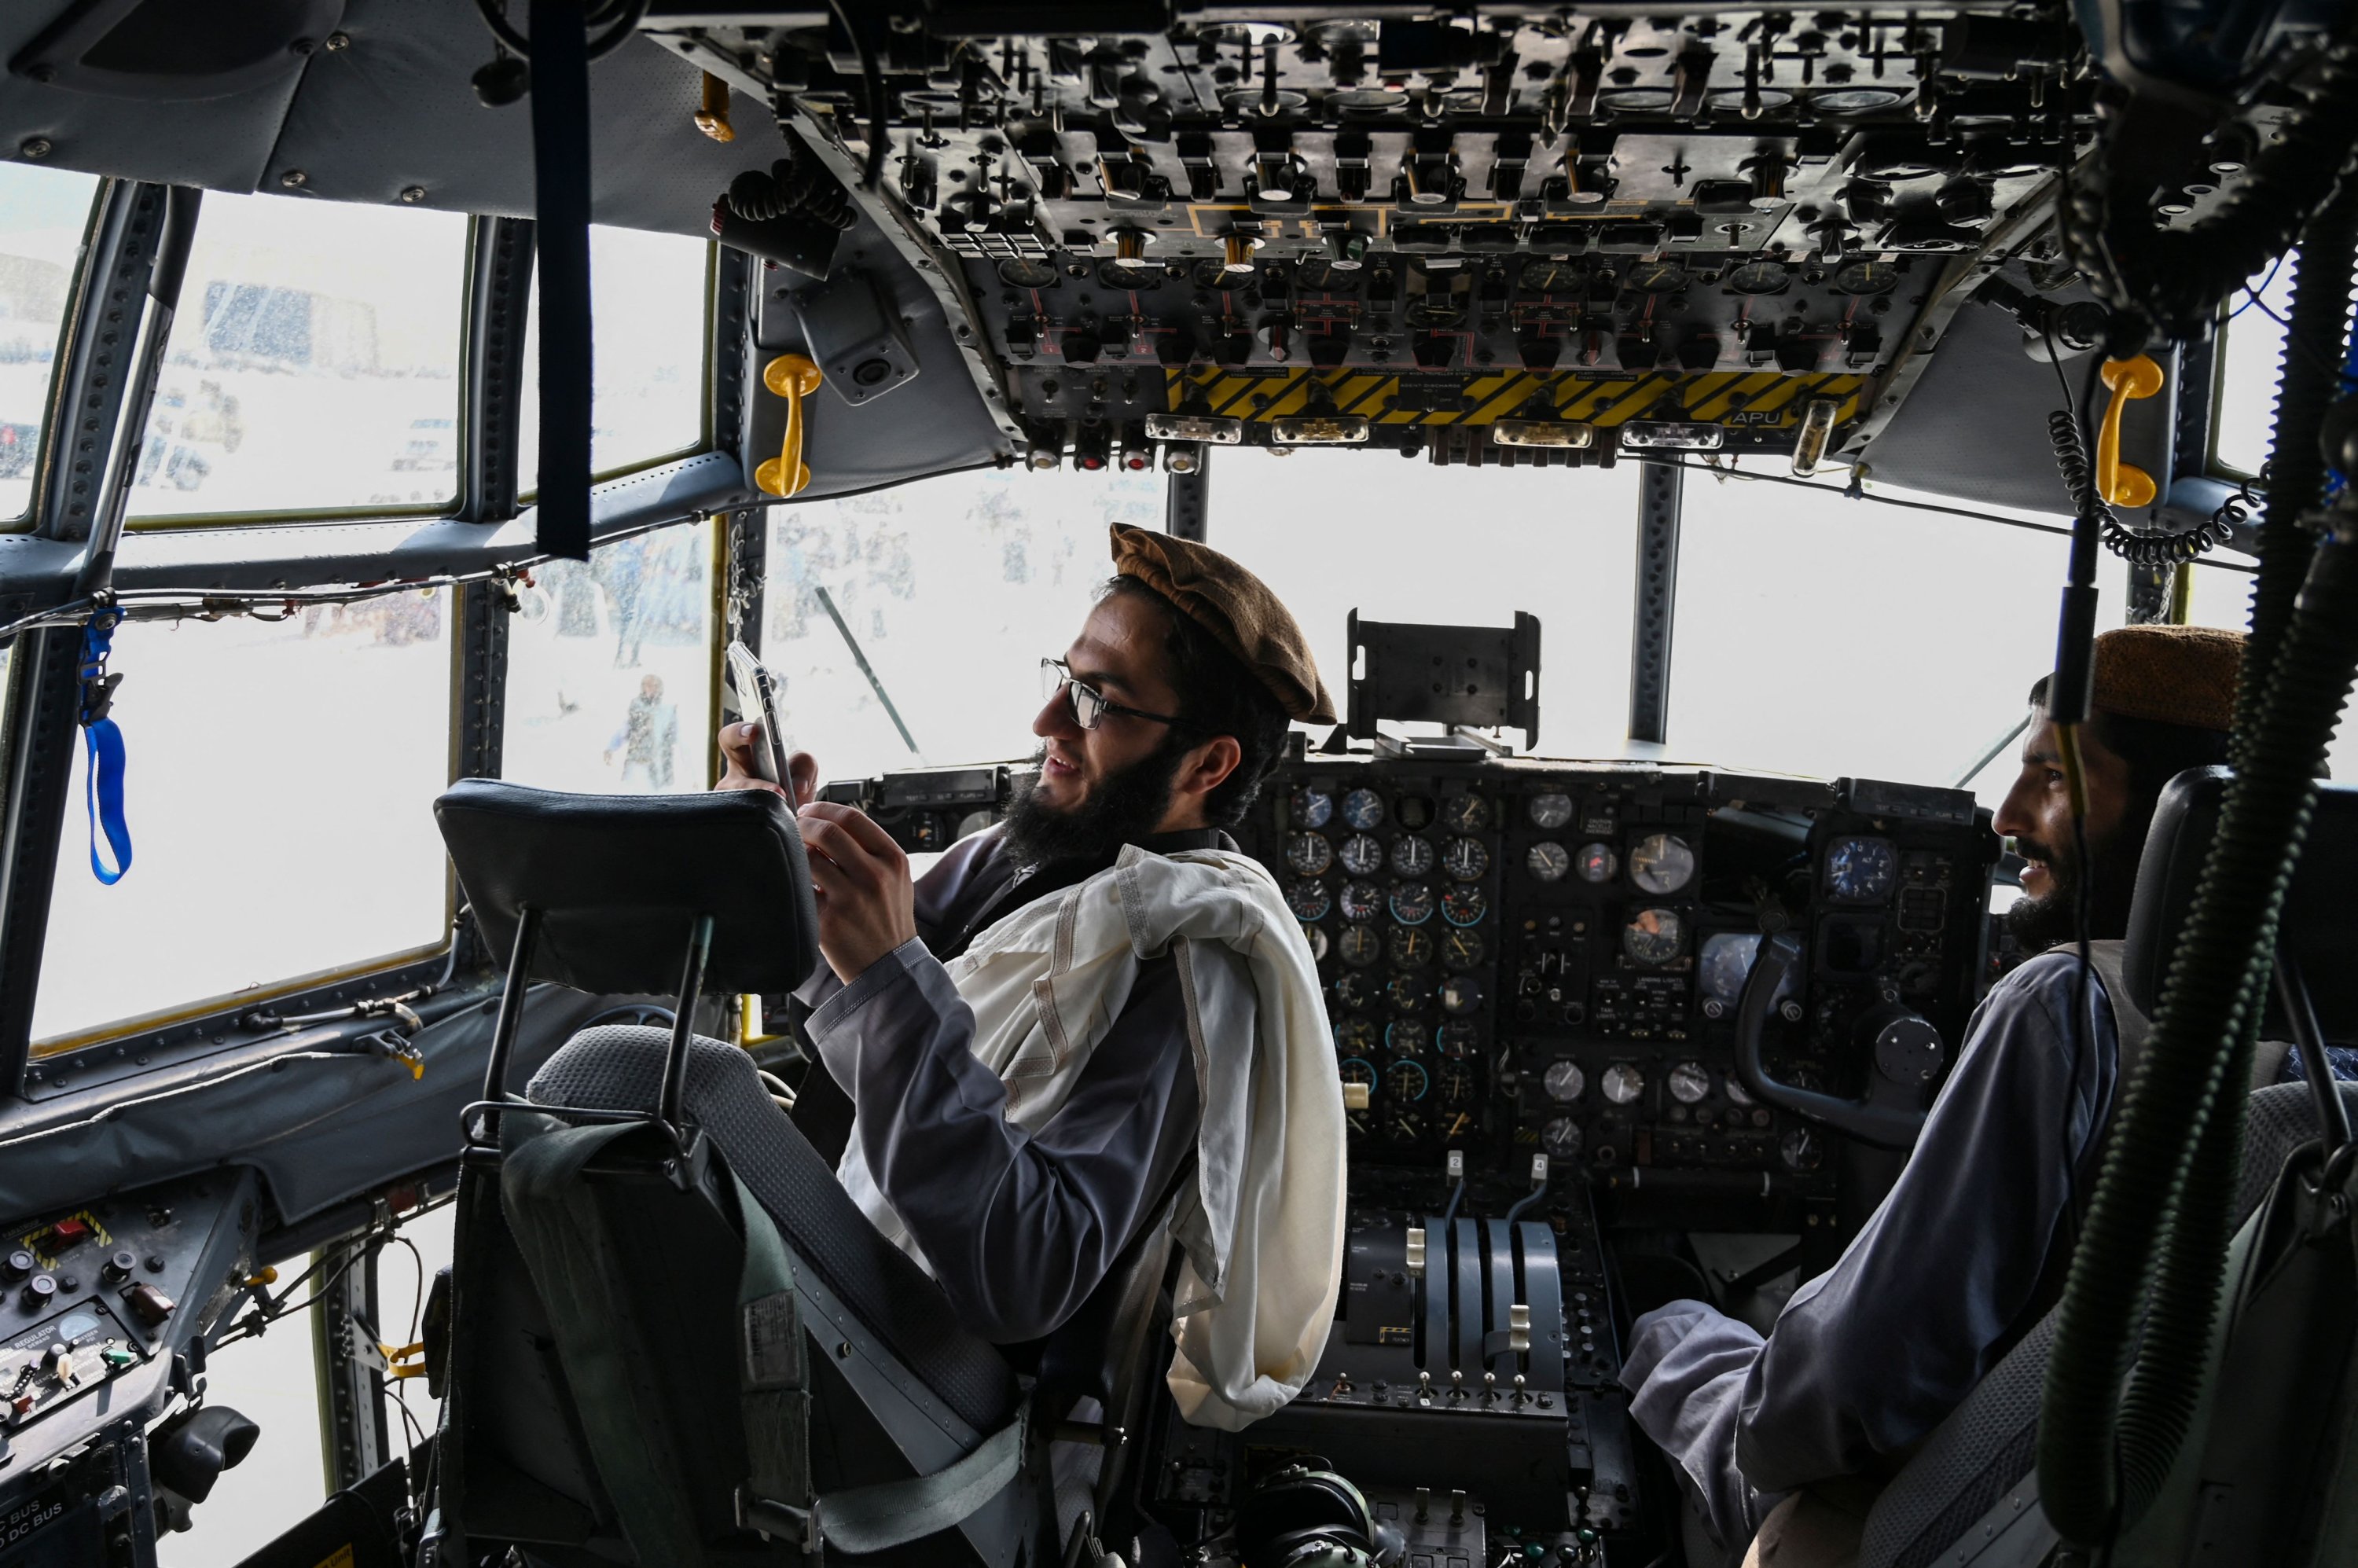 Taliban fighters sit in the cockpit of an Afghan Air Force aircraft at the airport in Kabul on Aug. 31, 2021, after the U.S. pulled all its troops out of the country to end a brutal 20-year war. (AFP Photo)